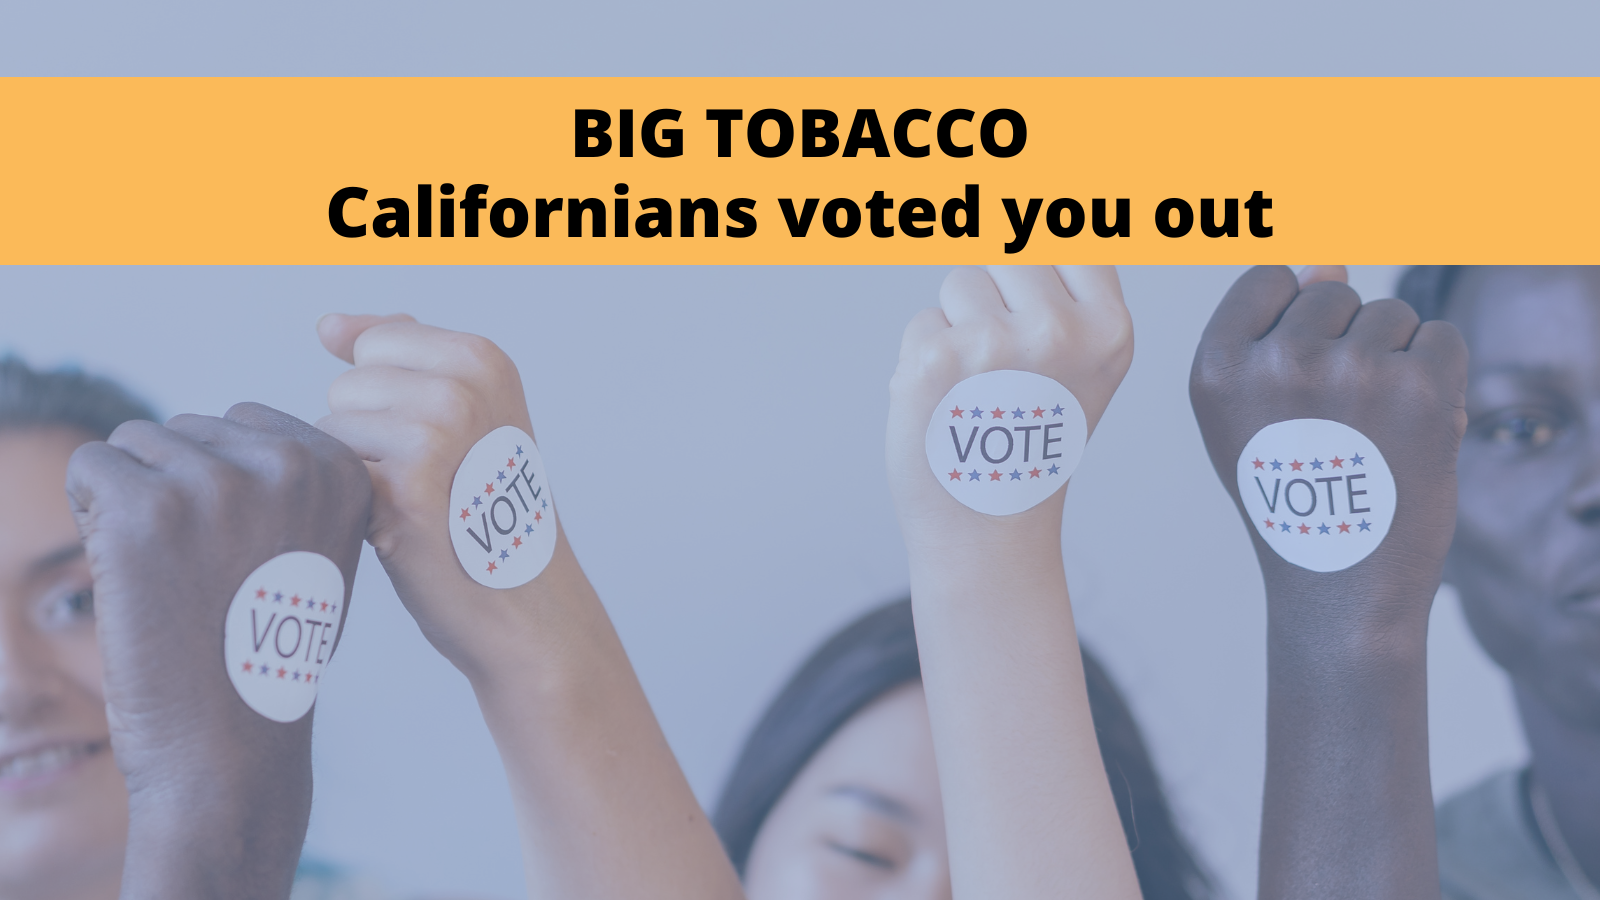 Twitter Ad: Big Tobacco Californians voted you out